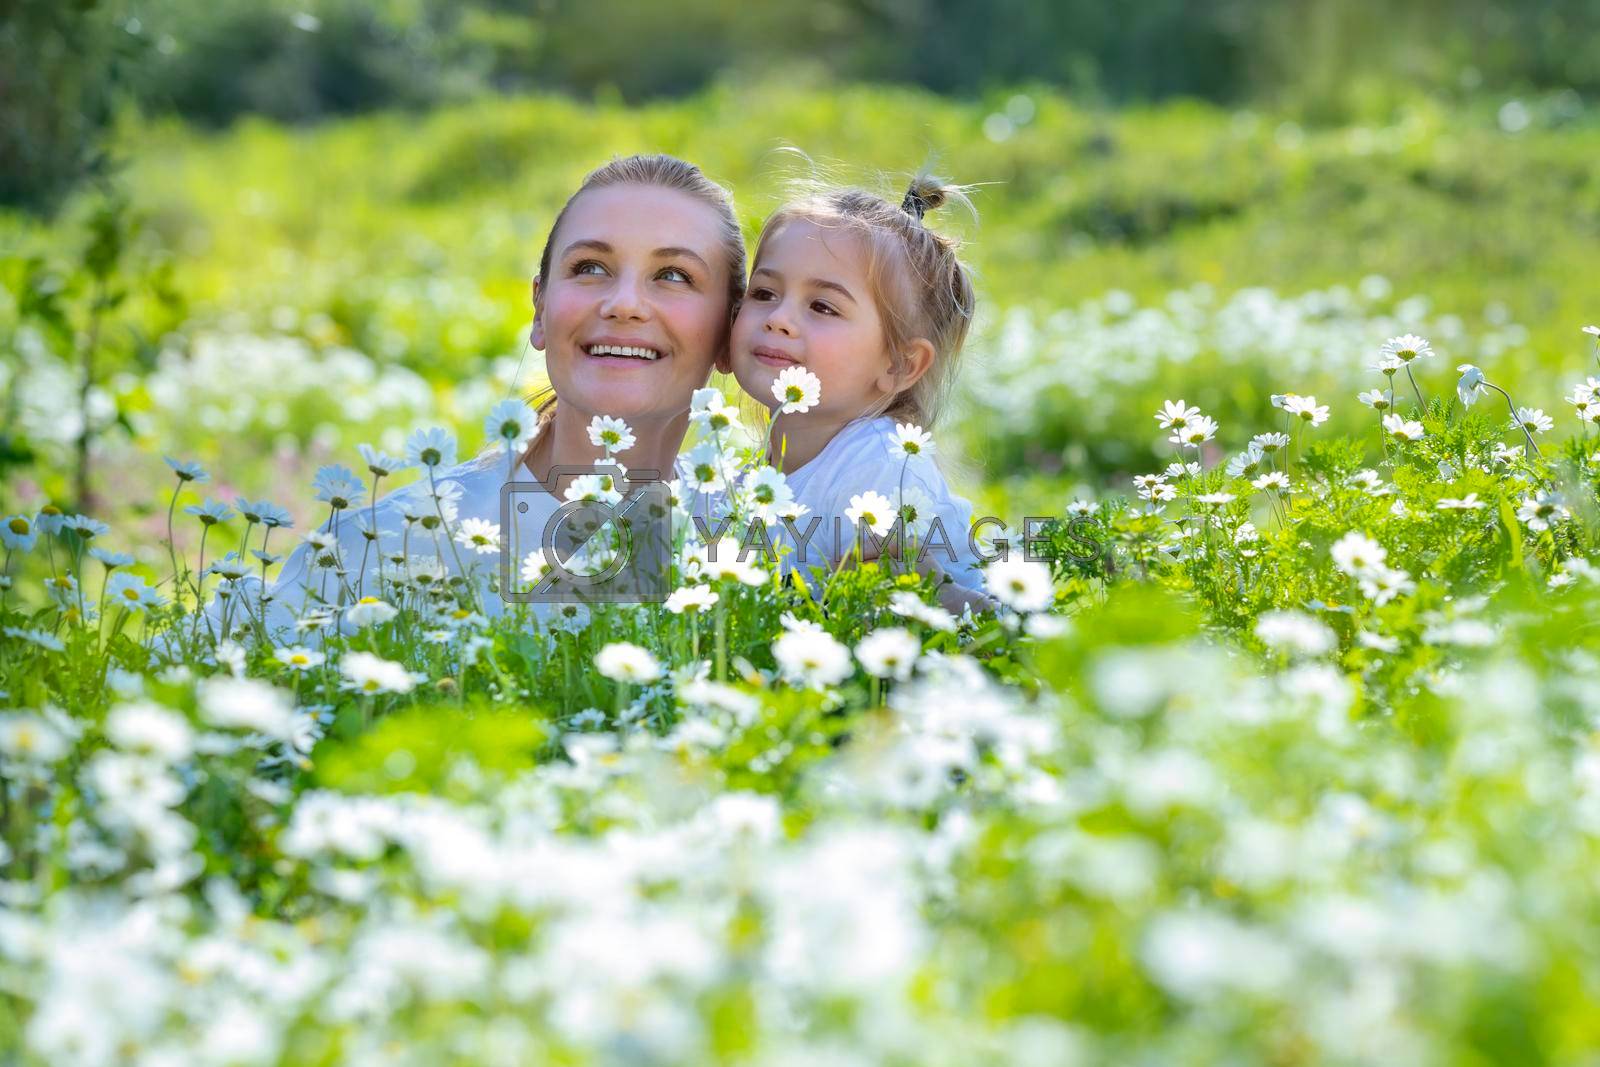 Royalty free image of Mother and Son on Flowers Field by Anna_Omelchenko